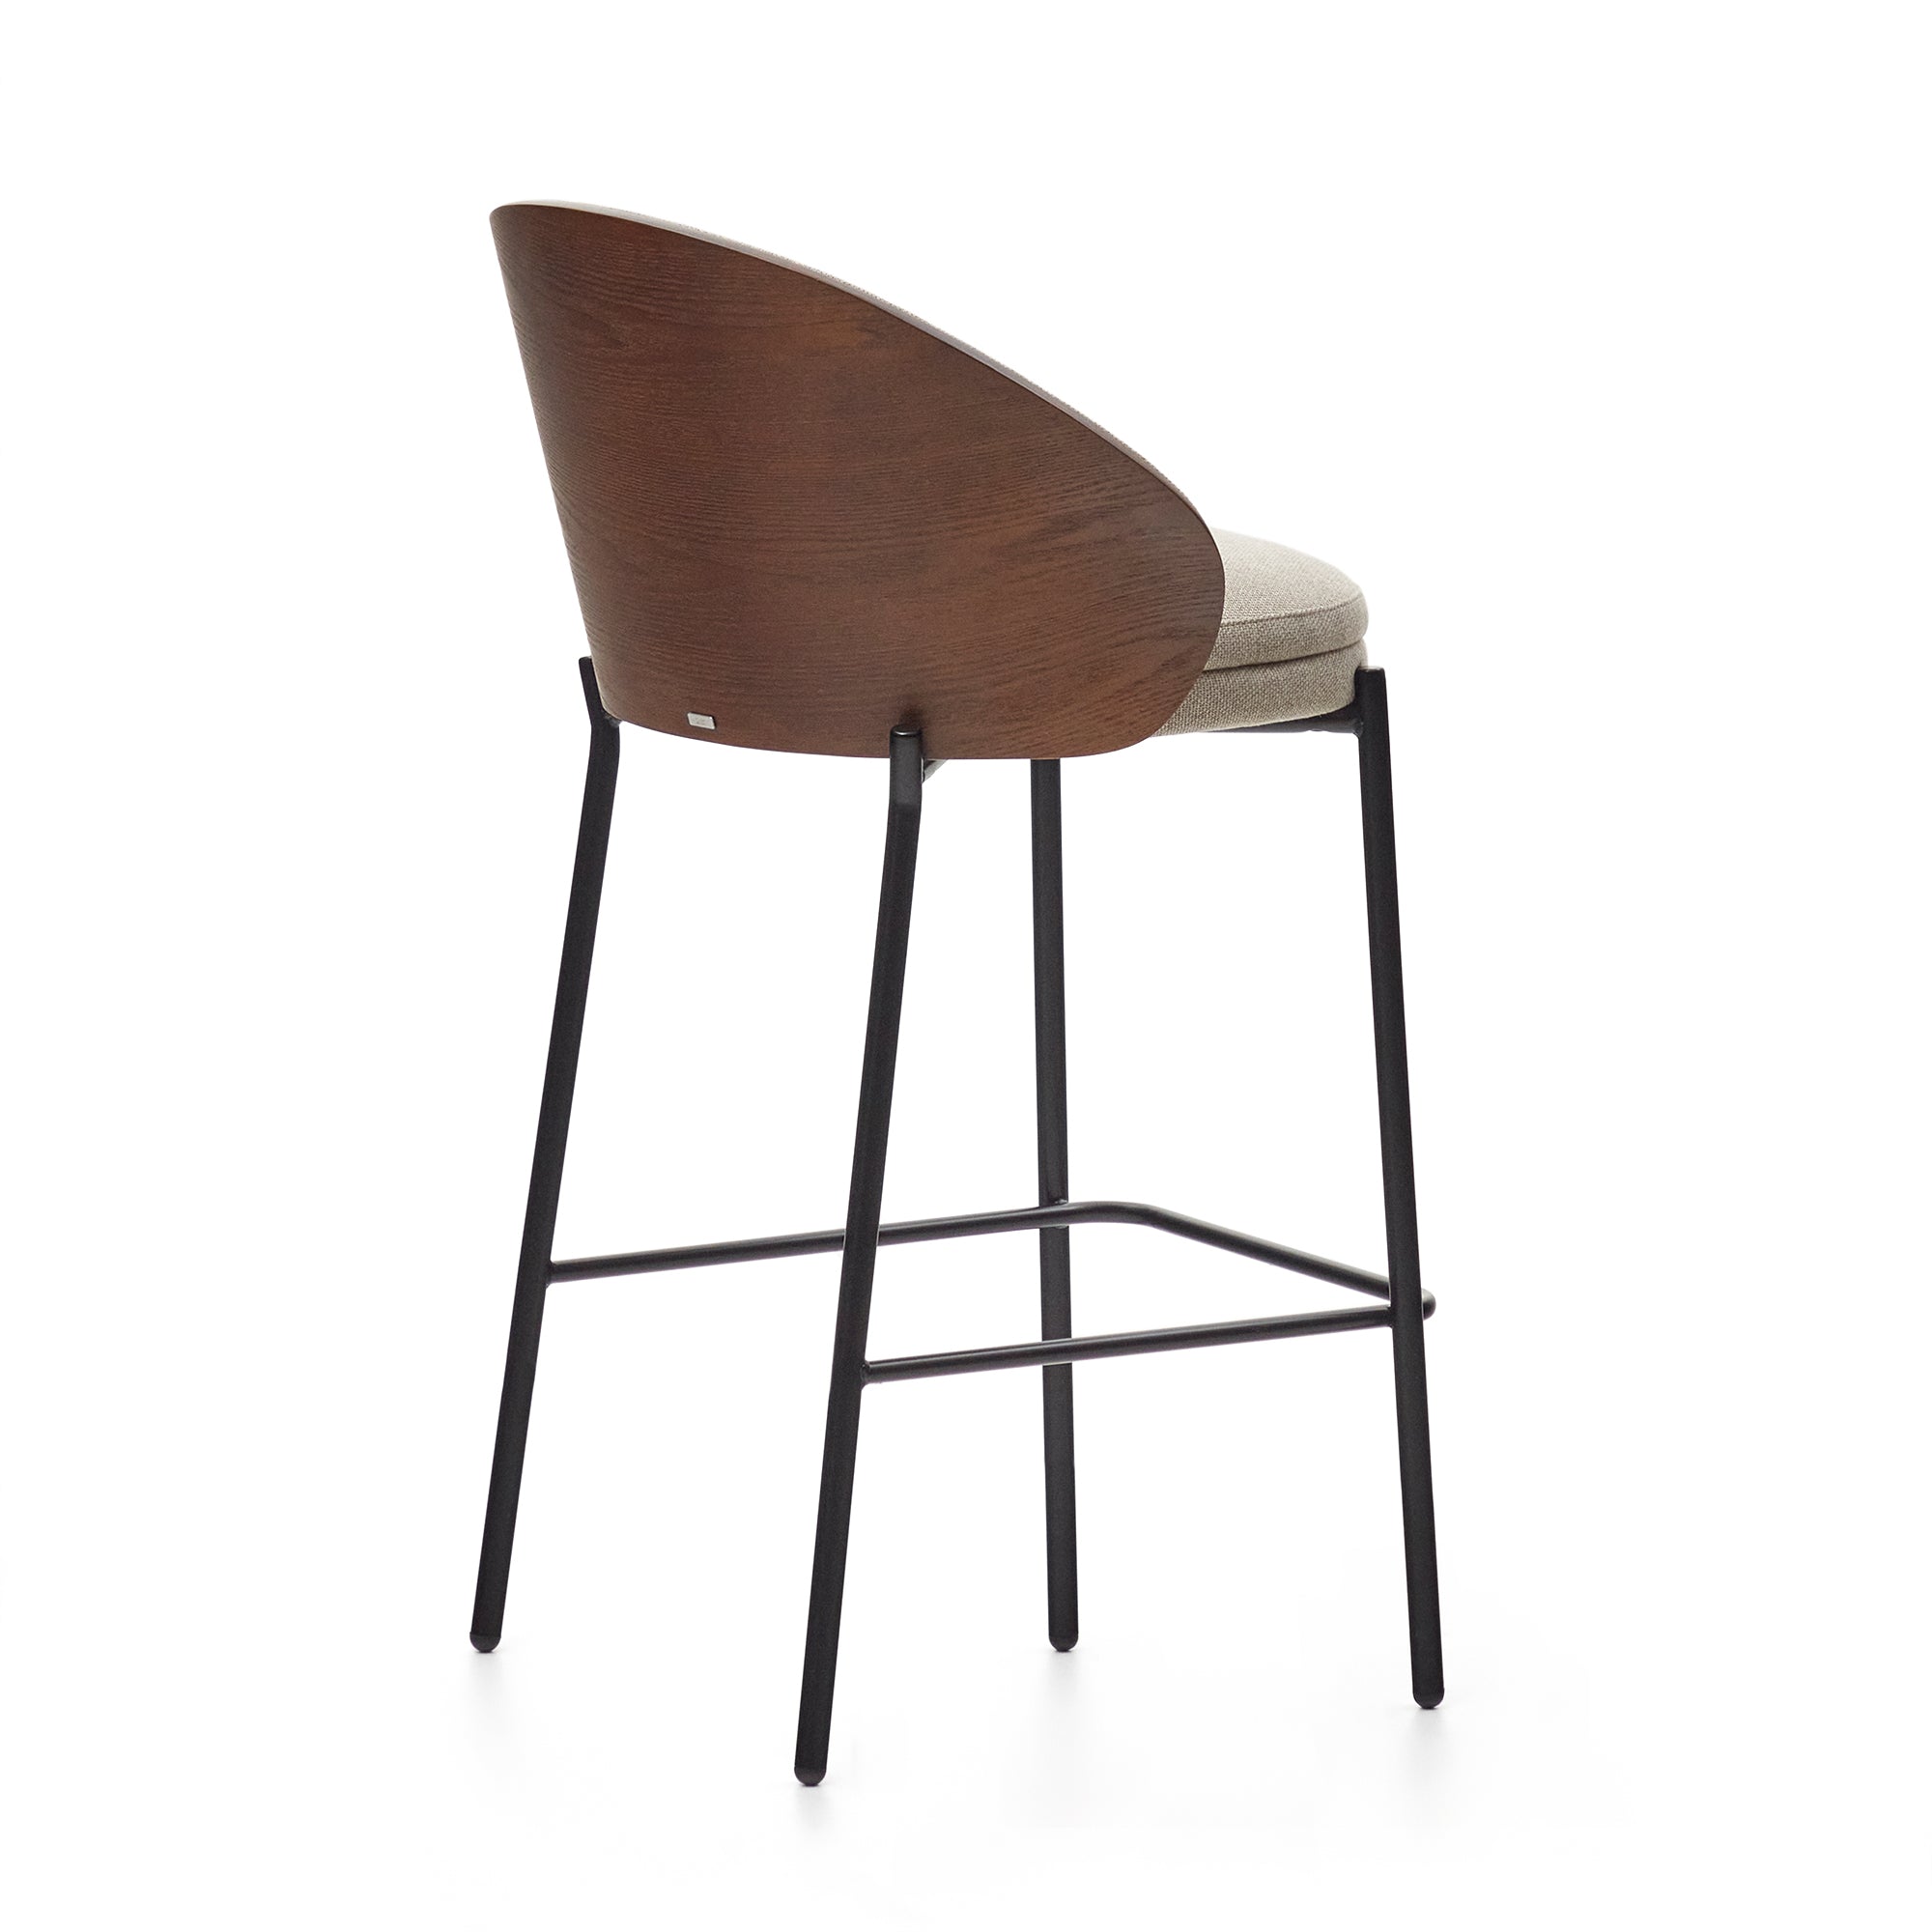 Eamy light brown stool in an ash wood veneer with a wenge finish and black metal, 65 cm